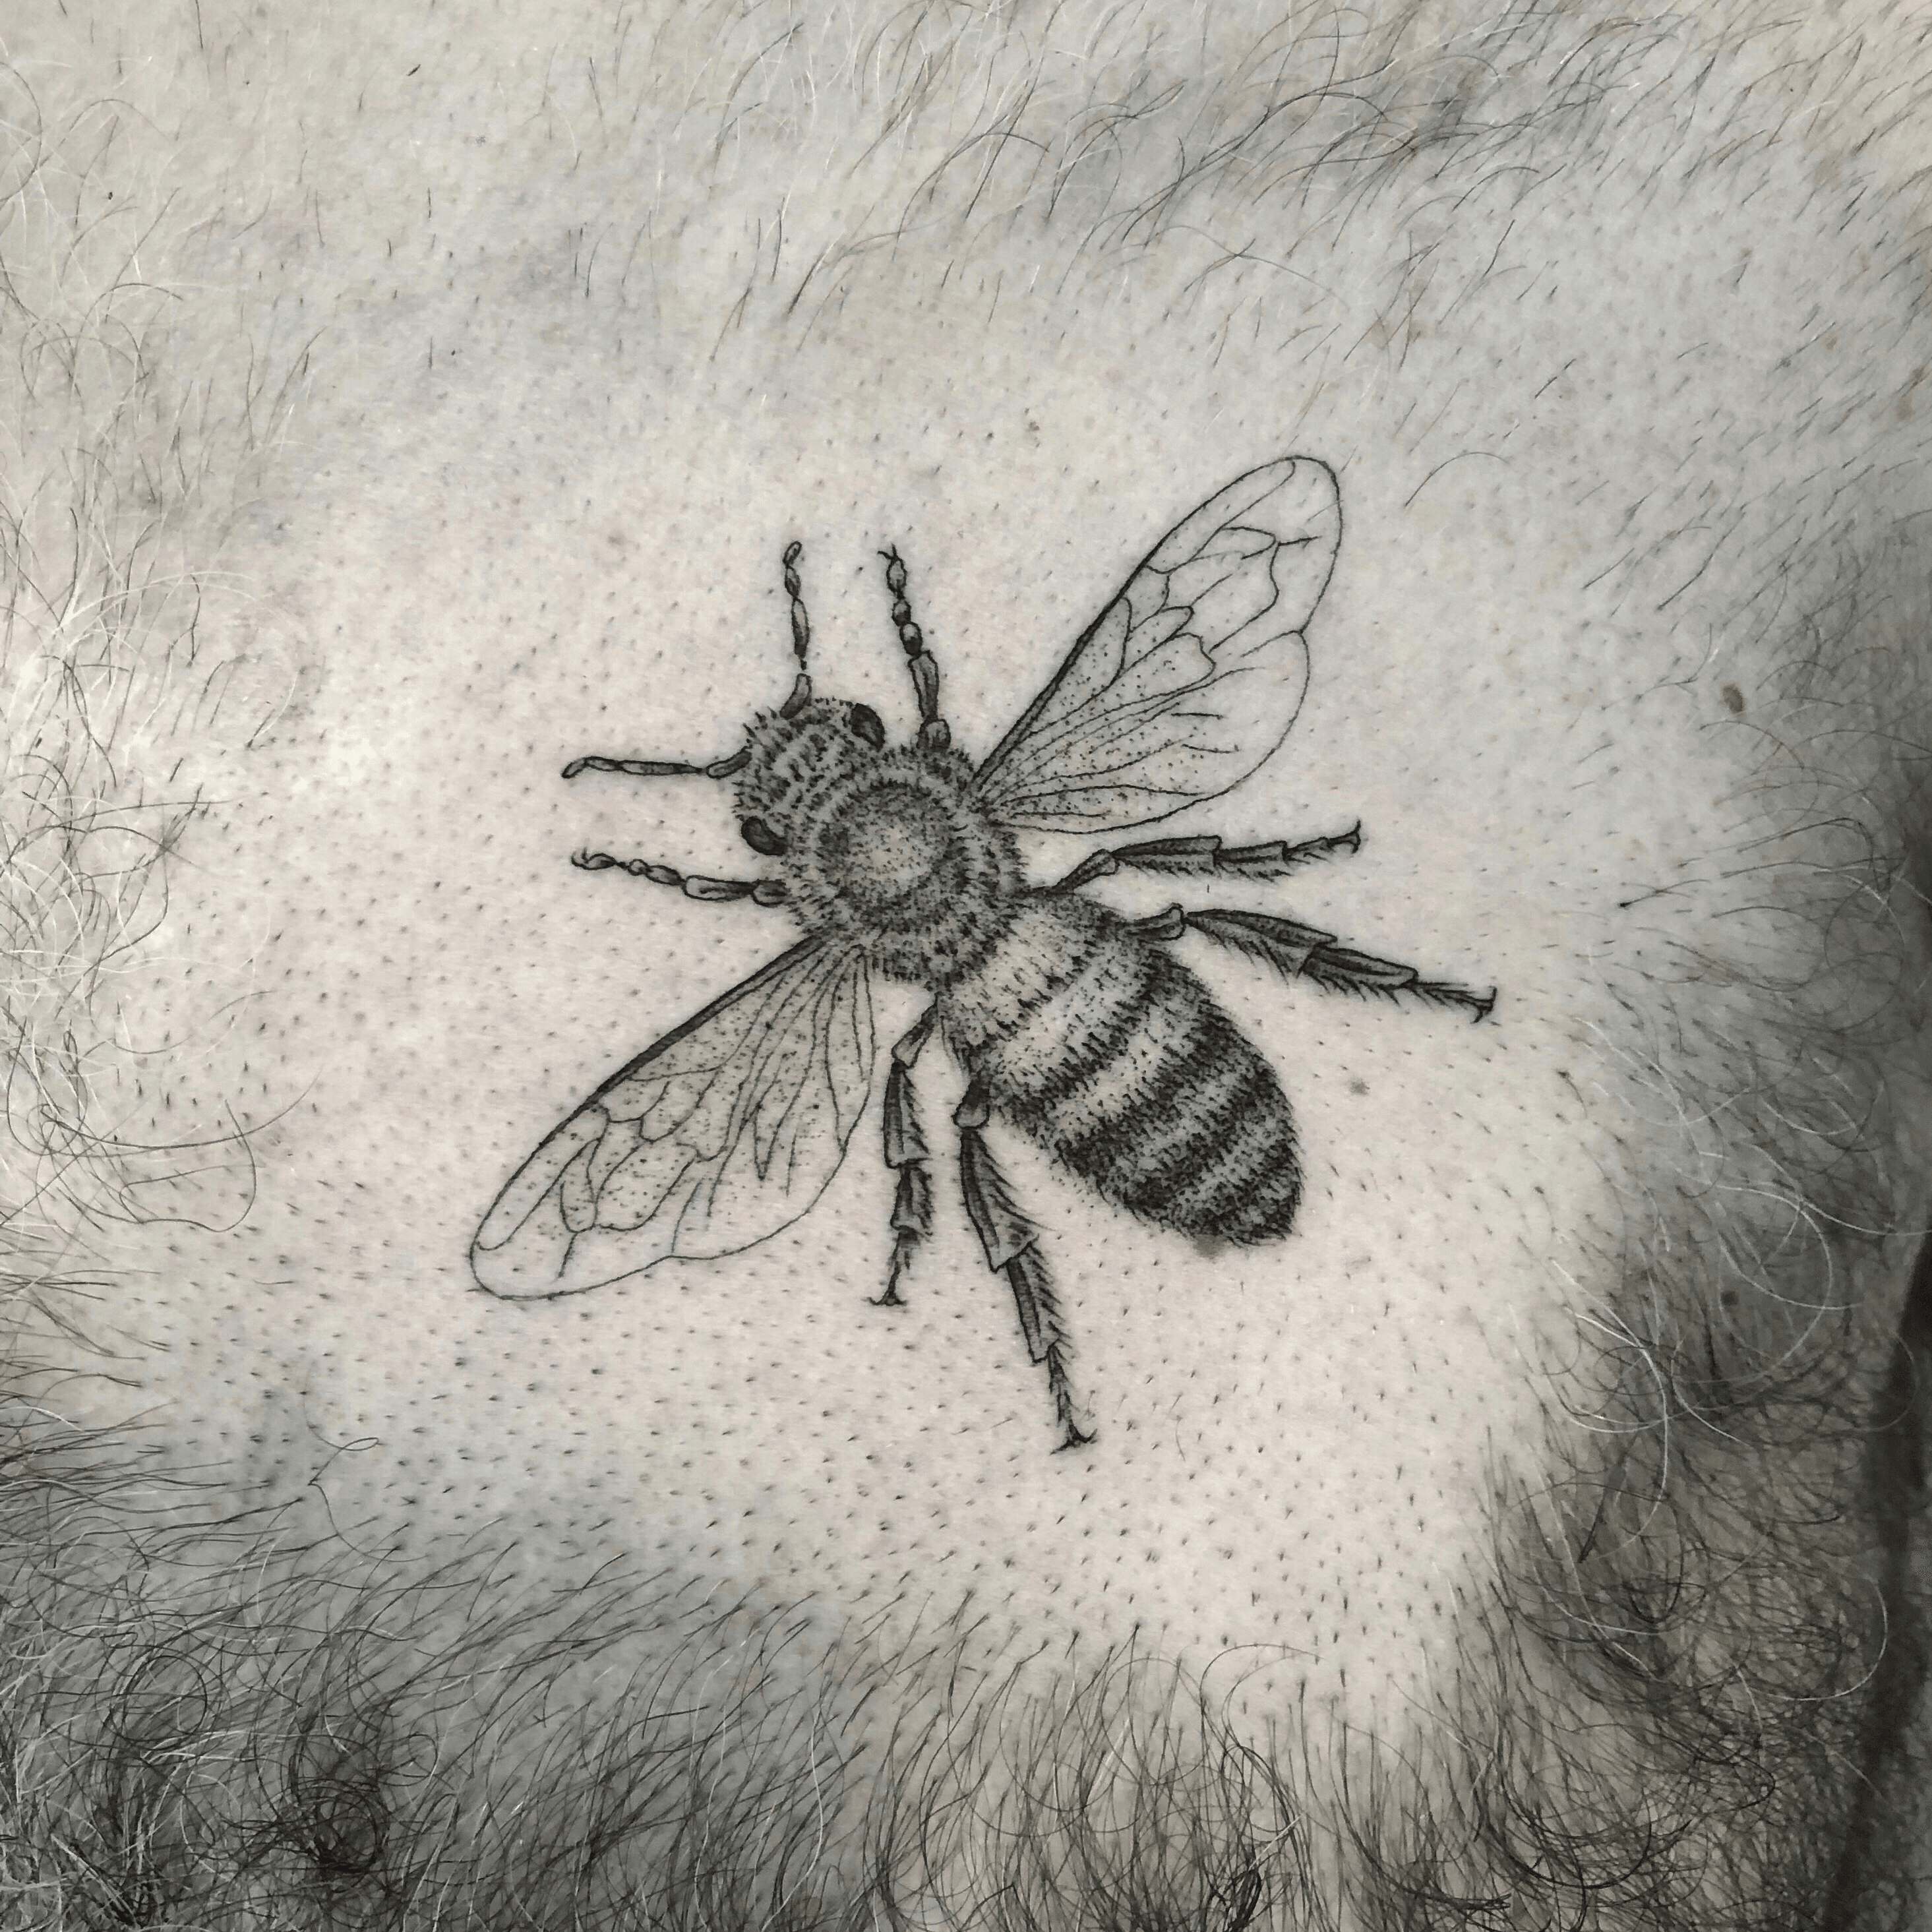 50 Bee Tattoo Designs For Men  A Sting Of Ink Ideas  Bee tattoo Tattoo  designs men Tattoos